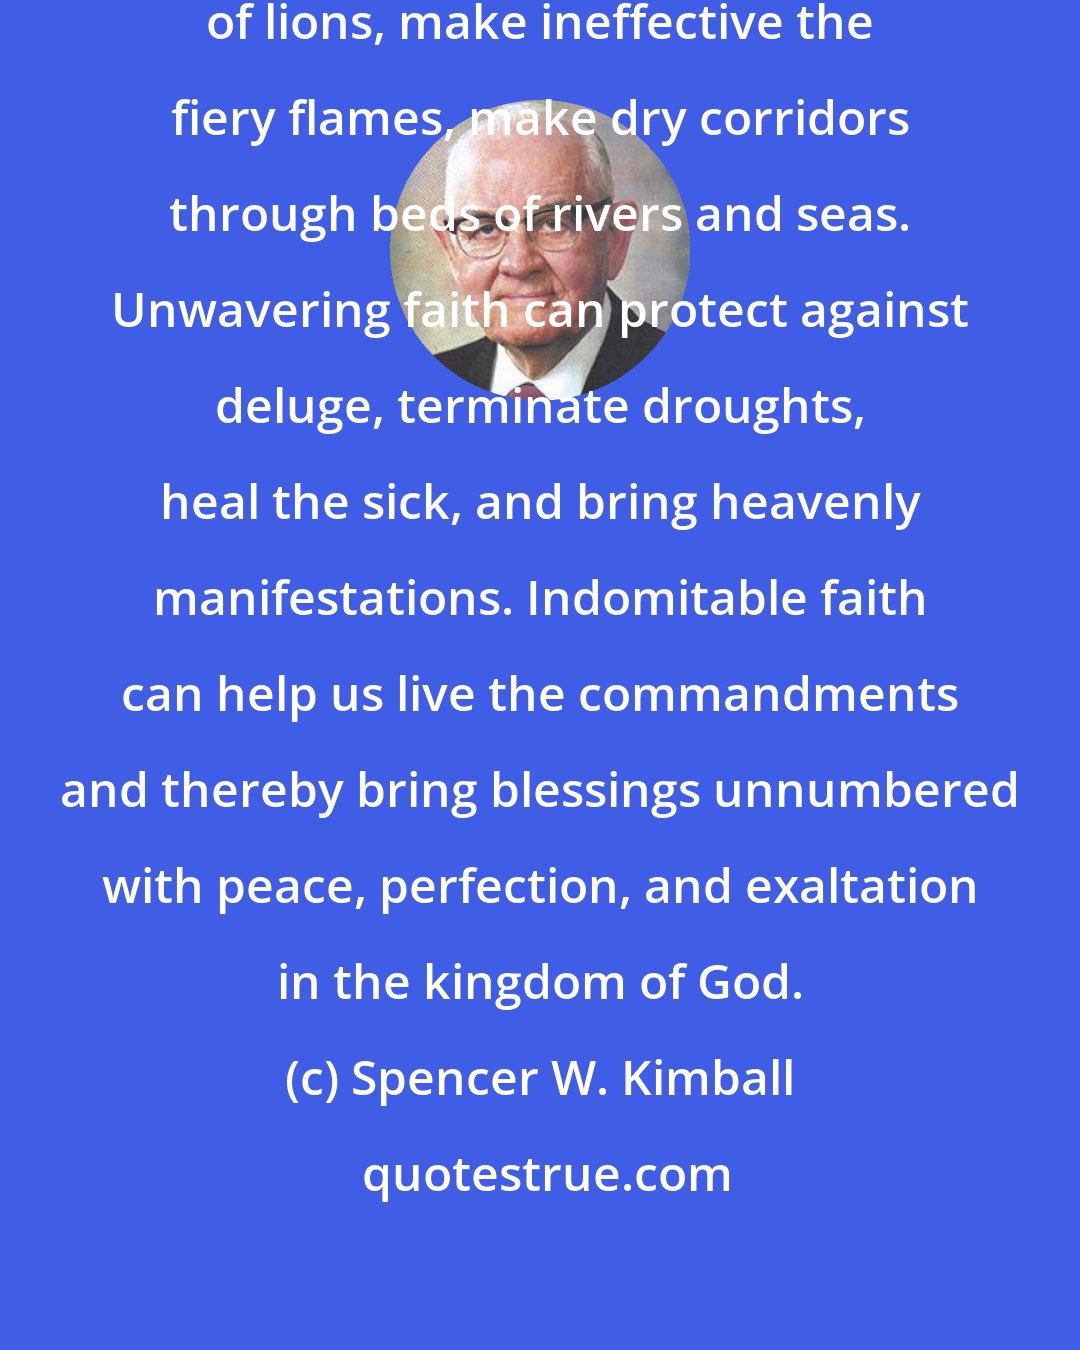 Spencer W. Kimball: Undaunted faith can stop the mouths of lions, make ineffective the fiery flames, make dry corridors through beds of rivers and seas. Unwavering faith can protect against deluge, terminate droughts, heal the sick, and bring heavenly manifestations. Indomitable faith can help us live the commandments and thereby bring blessings unnumbered with peace, perfection, and exaltation in the kingdom of God.